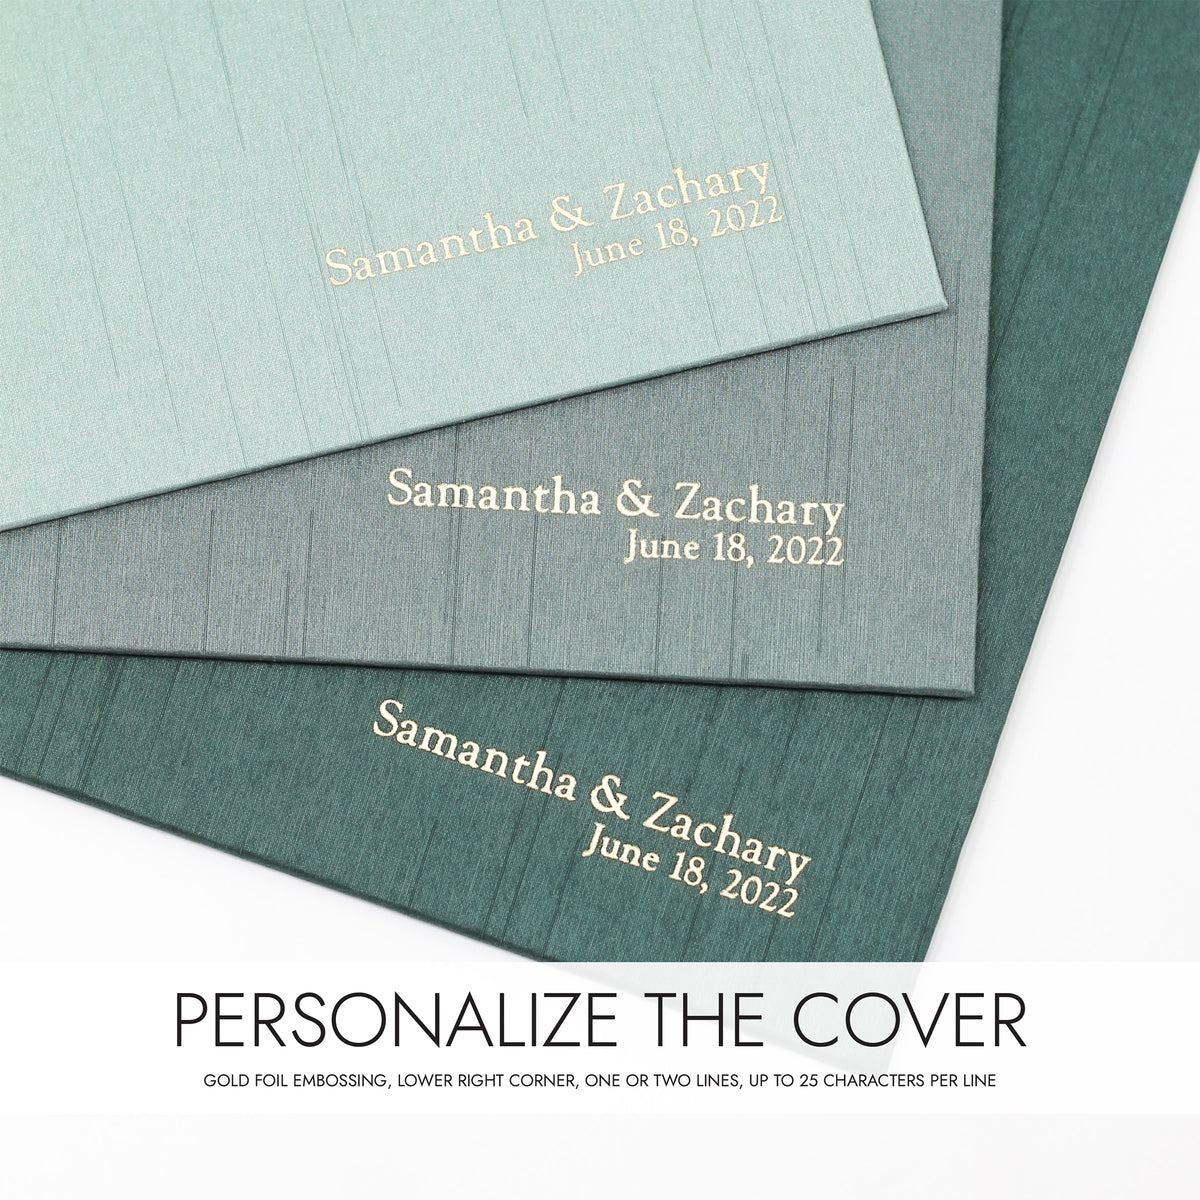 Guestbook Embossed with “Guests” | Cover: Champagne Silk | Available Personalized